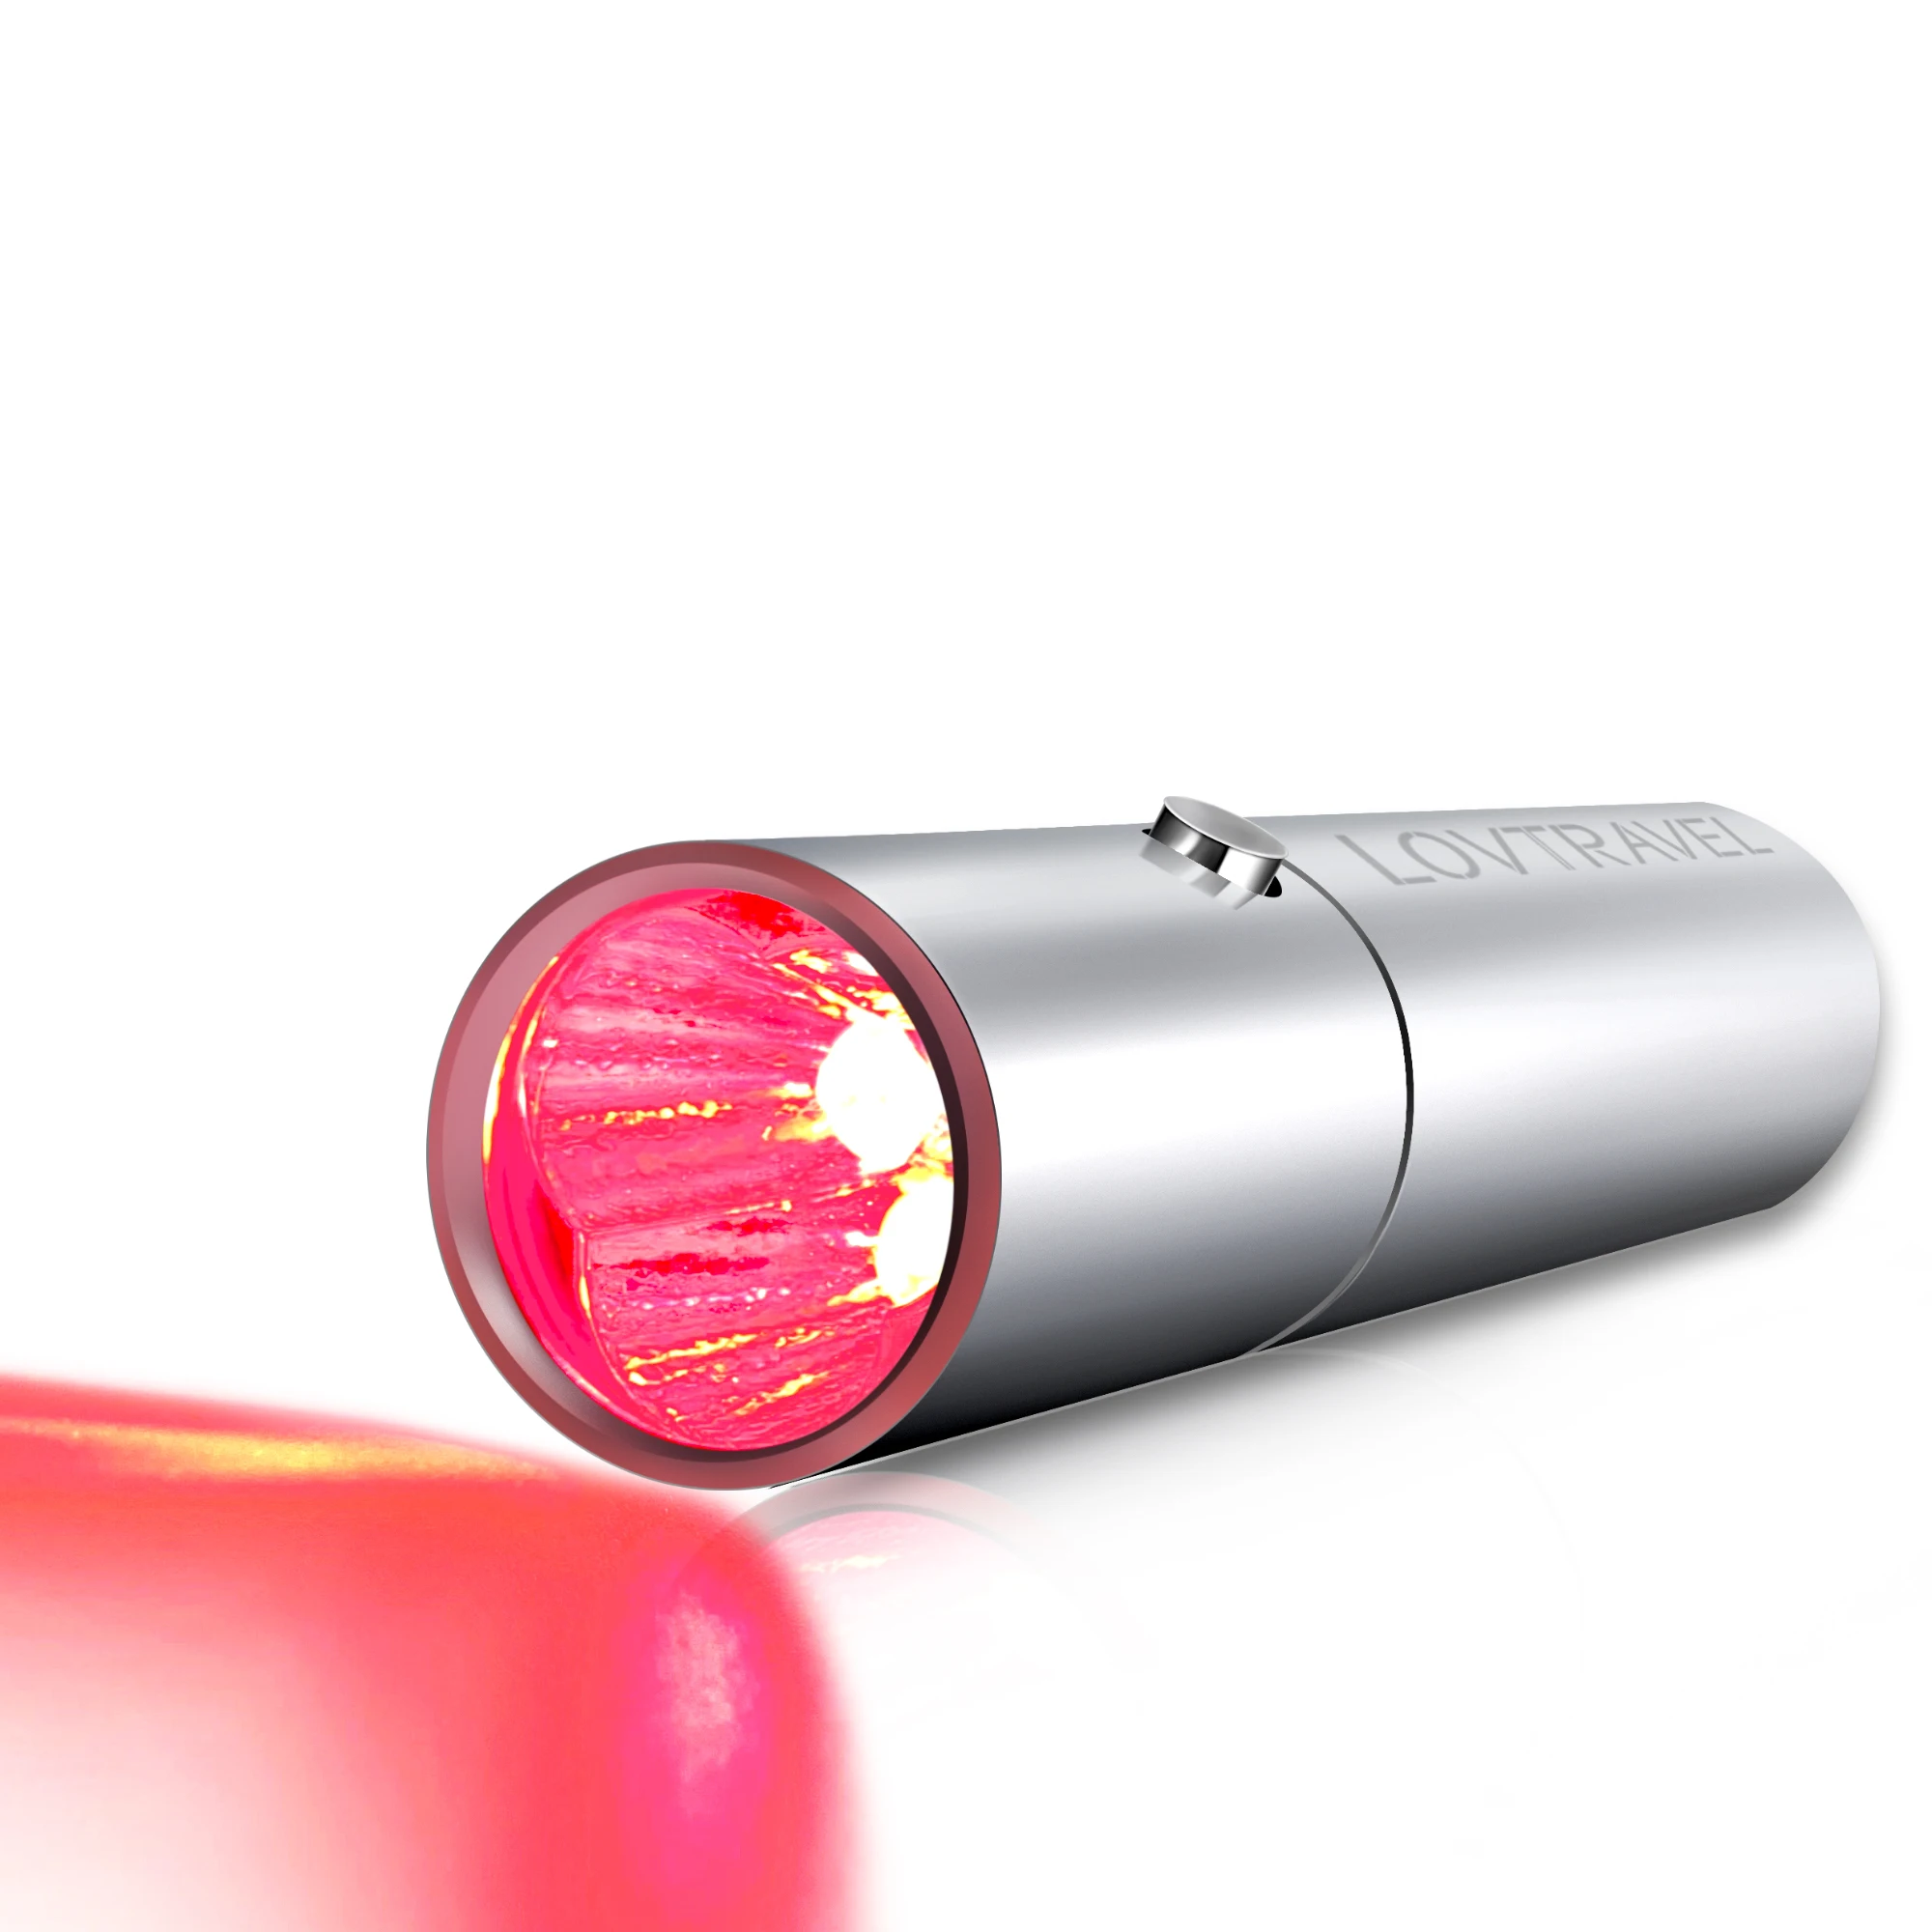 LOVTRAVEL 630nm 660nm and 850nm LED Red Light Therapy Near Infrared Light Therapy Devices Pen for Pain Relief - with Storage bag